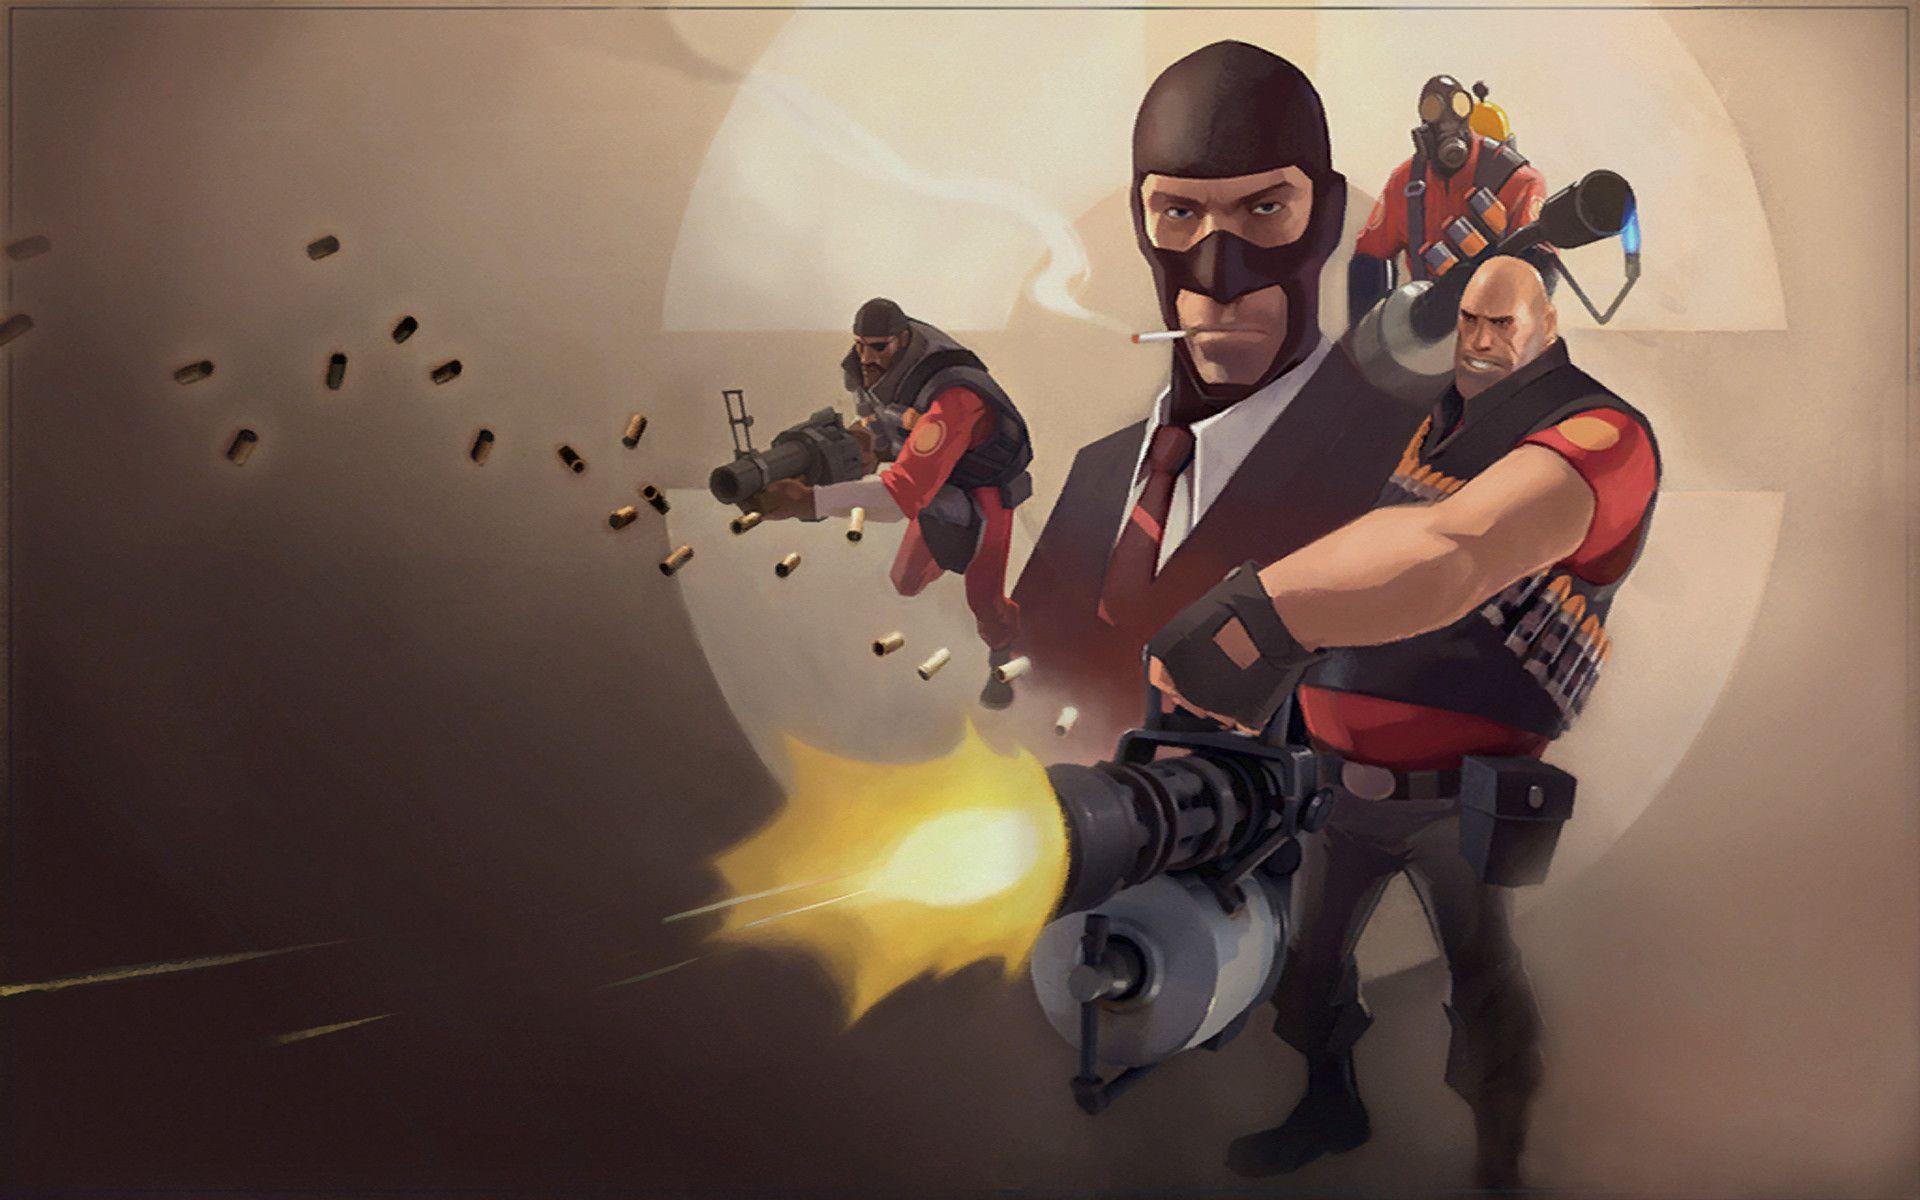 Wallpaper Team Fortress 2 TF2 FPS all characters screnshot 4k 6k 8k  Ultra HD review PC Games 3719